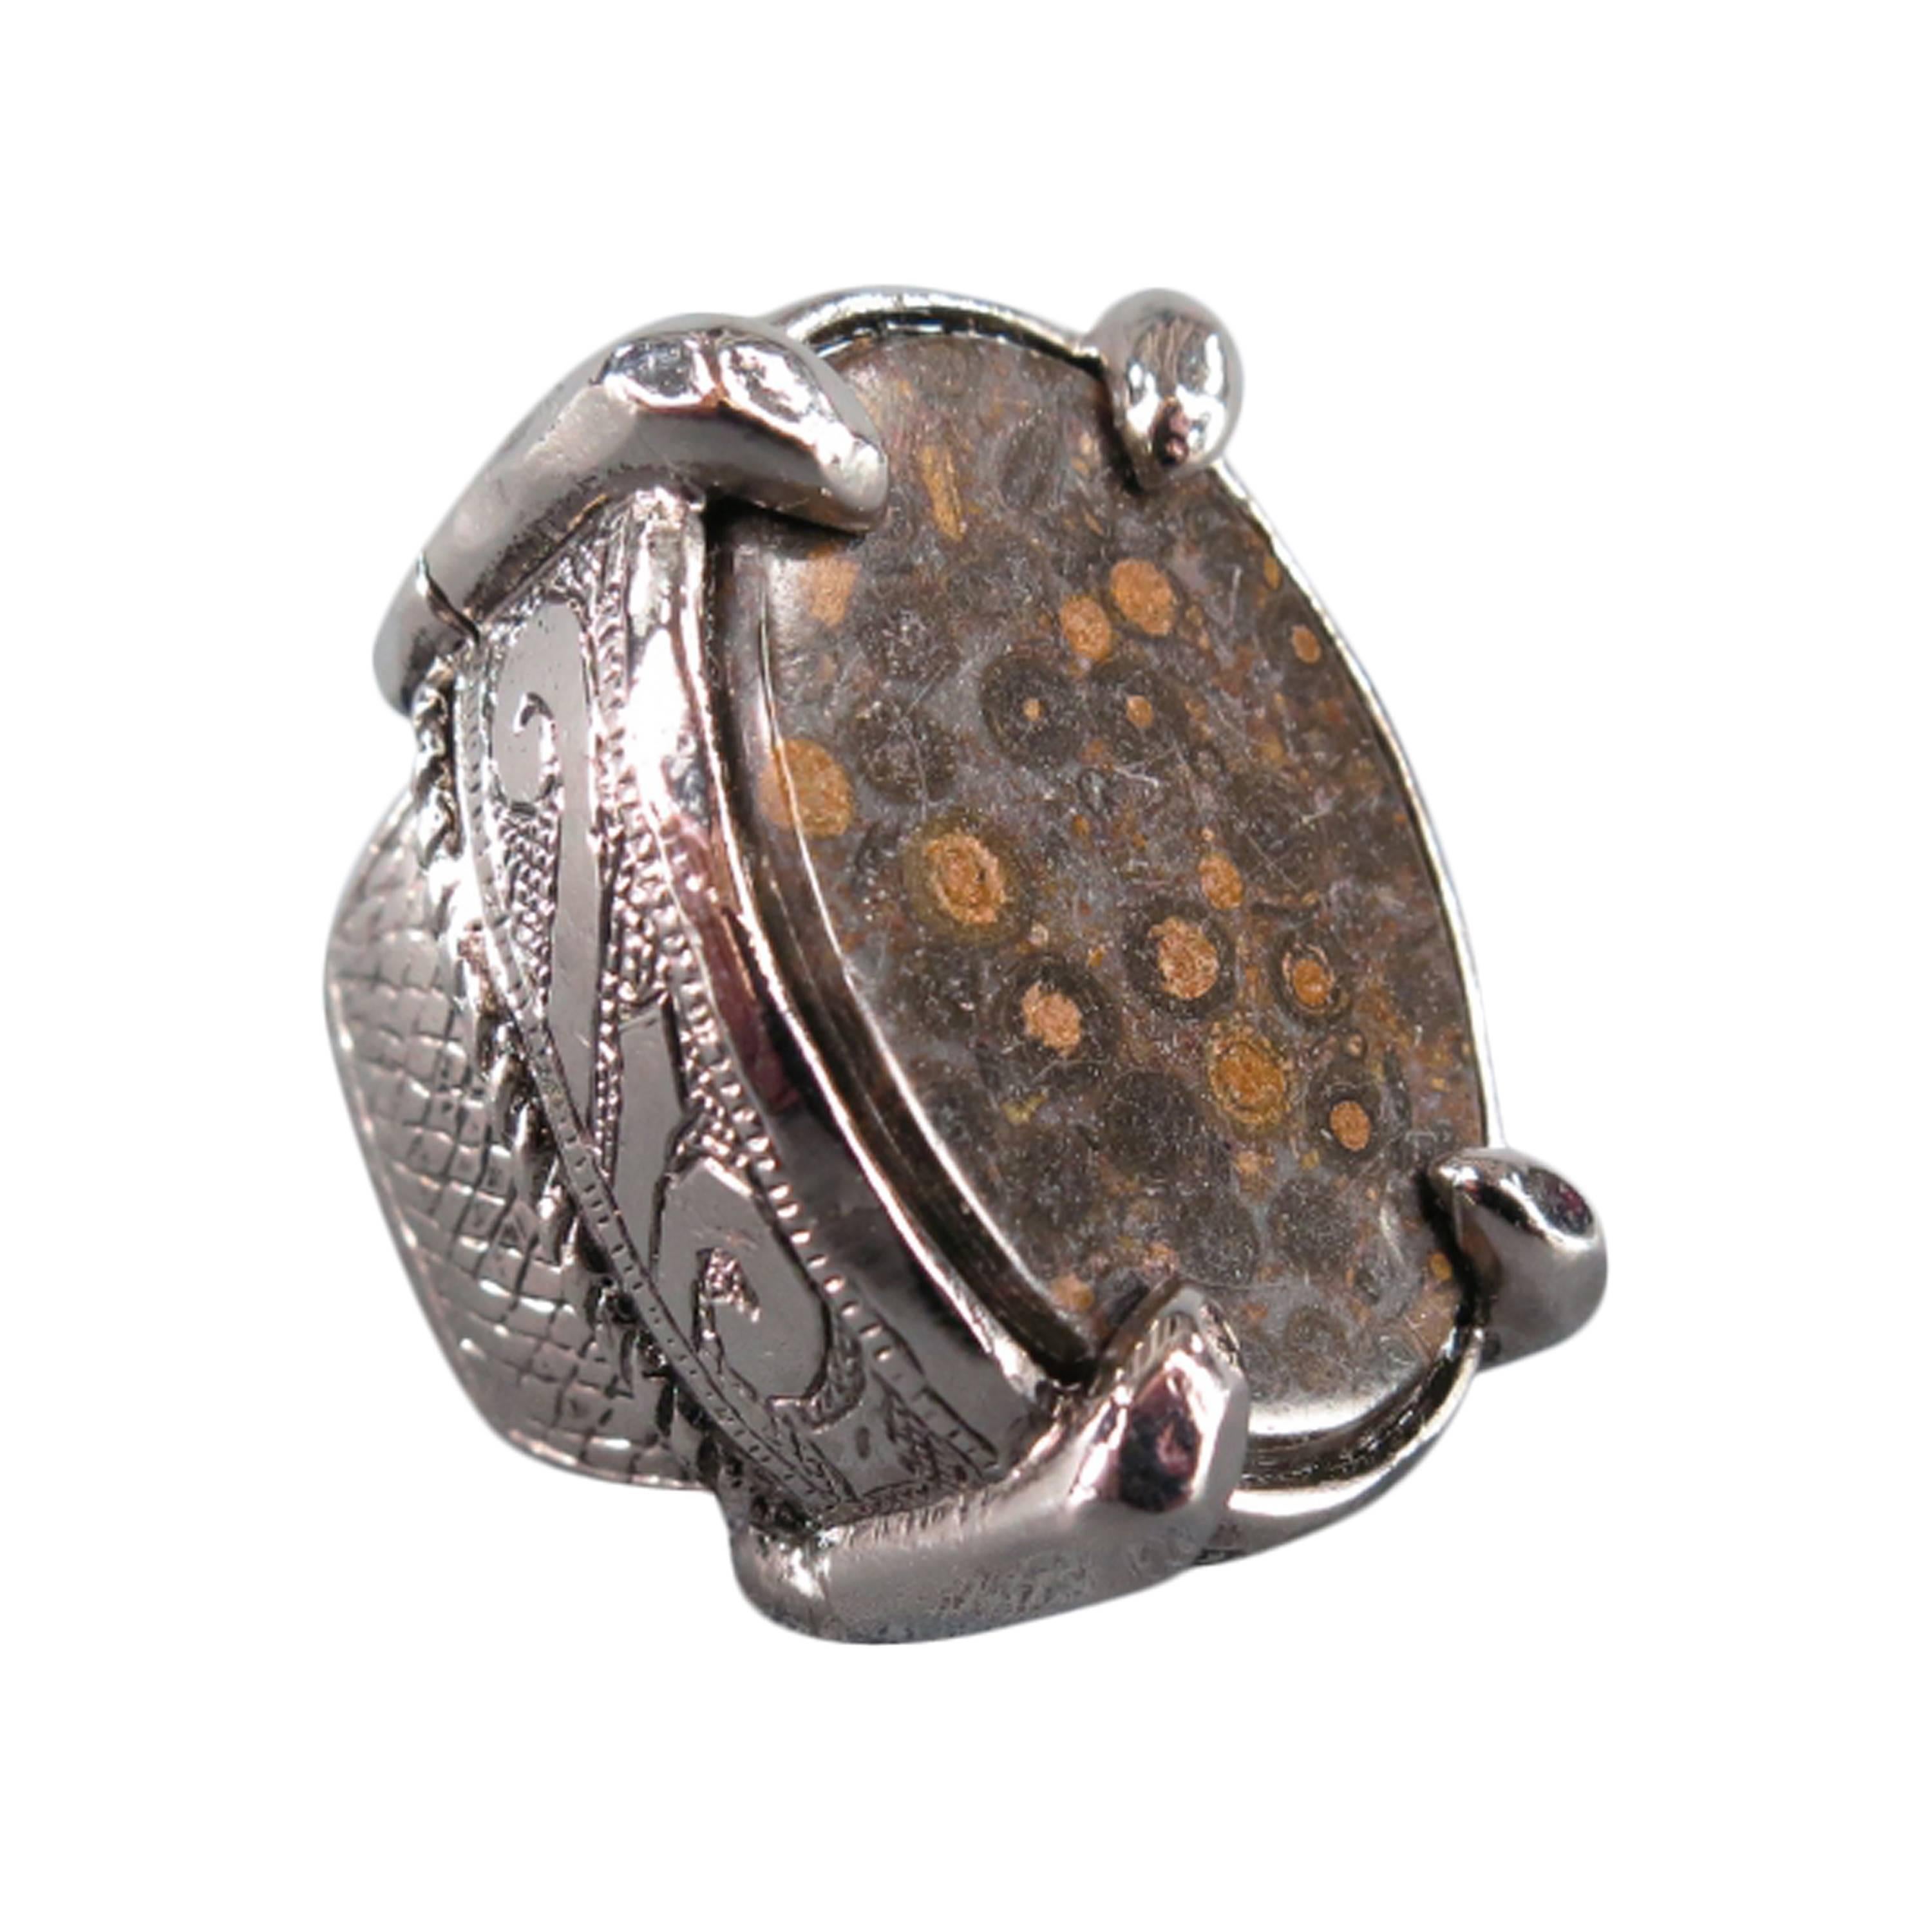 ROBERTO CAVALLI Brown Stone Silver Engraved Cocktail Ring